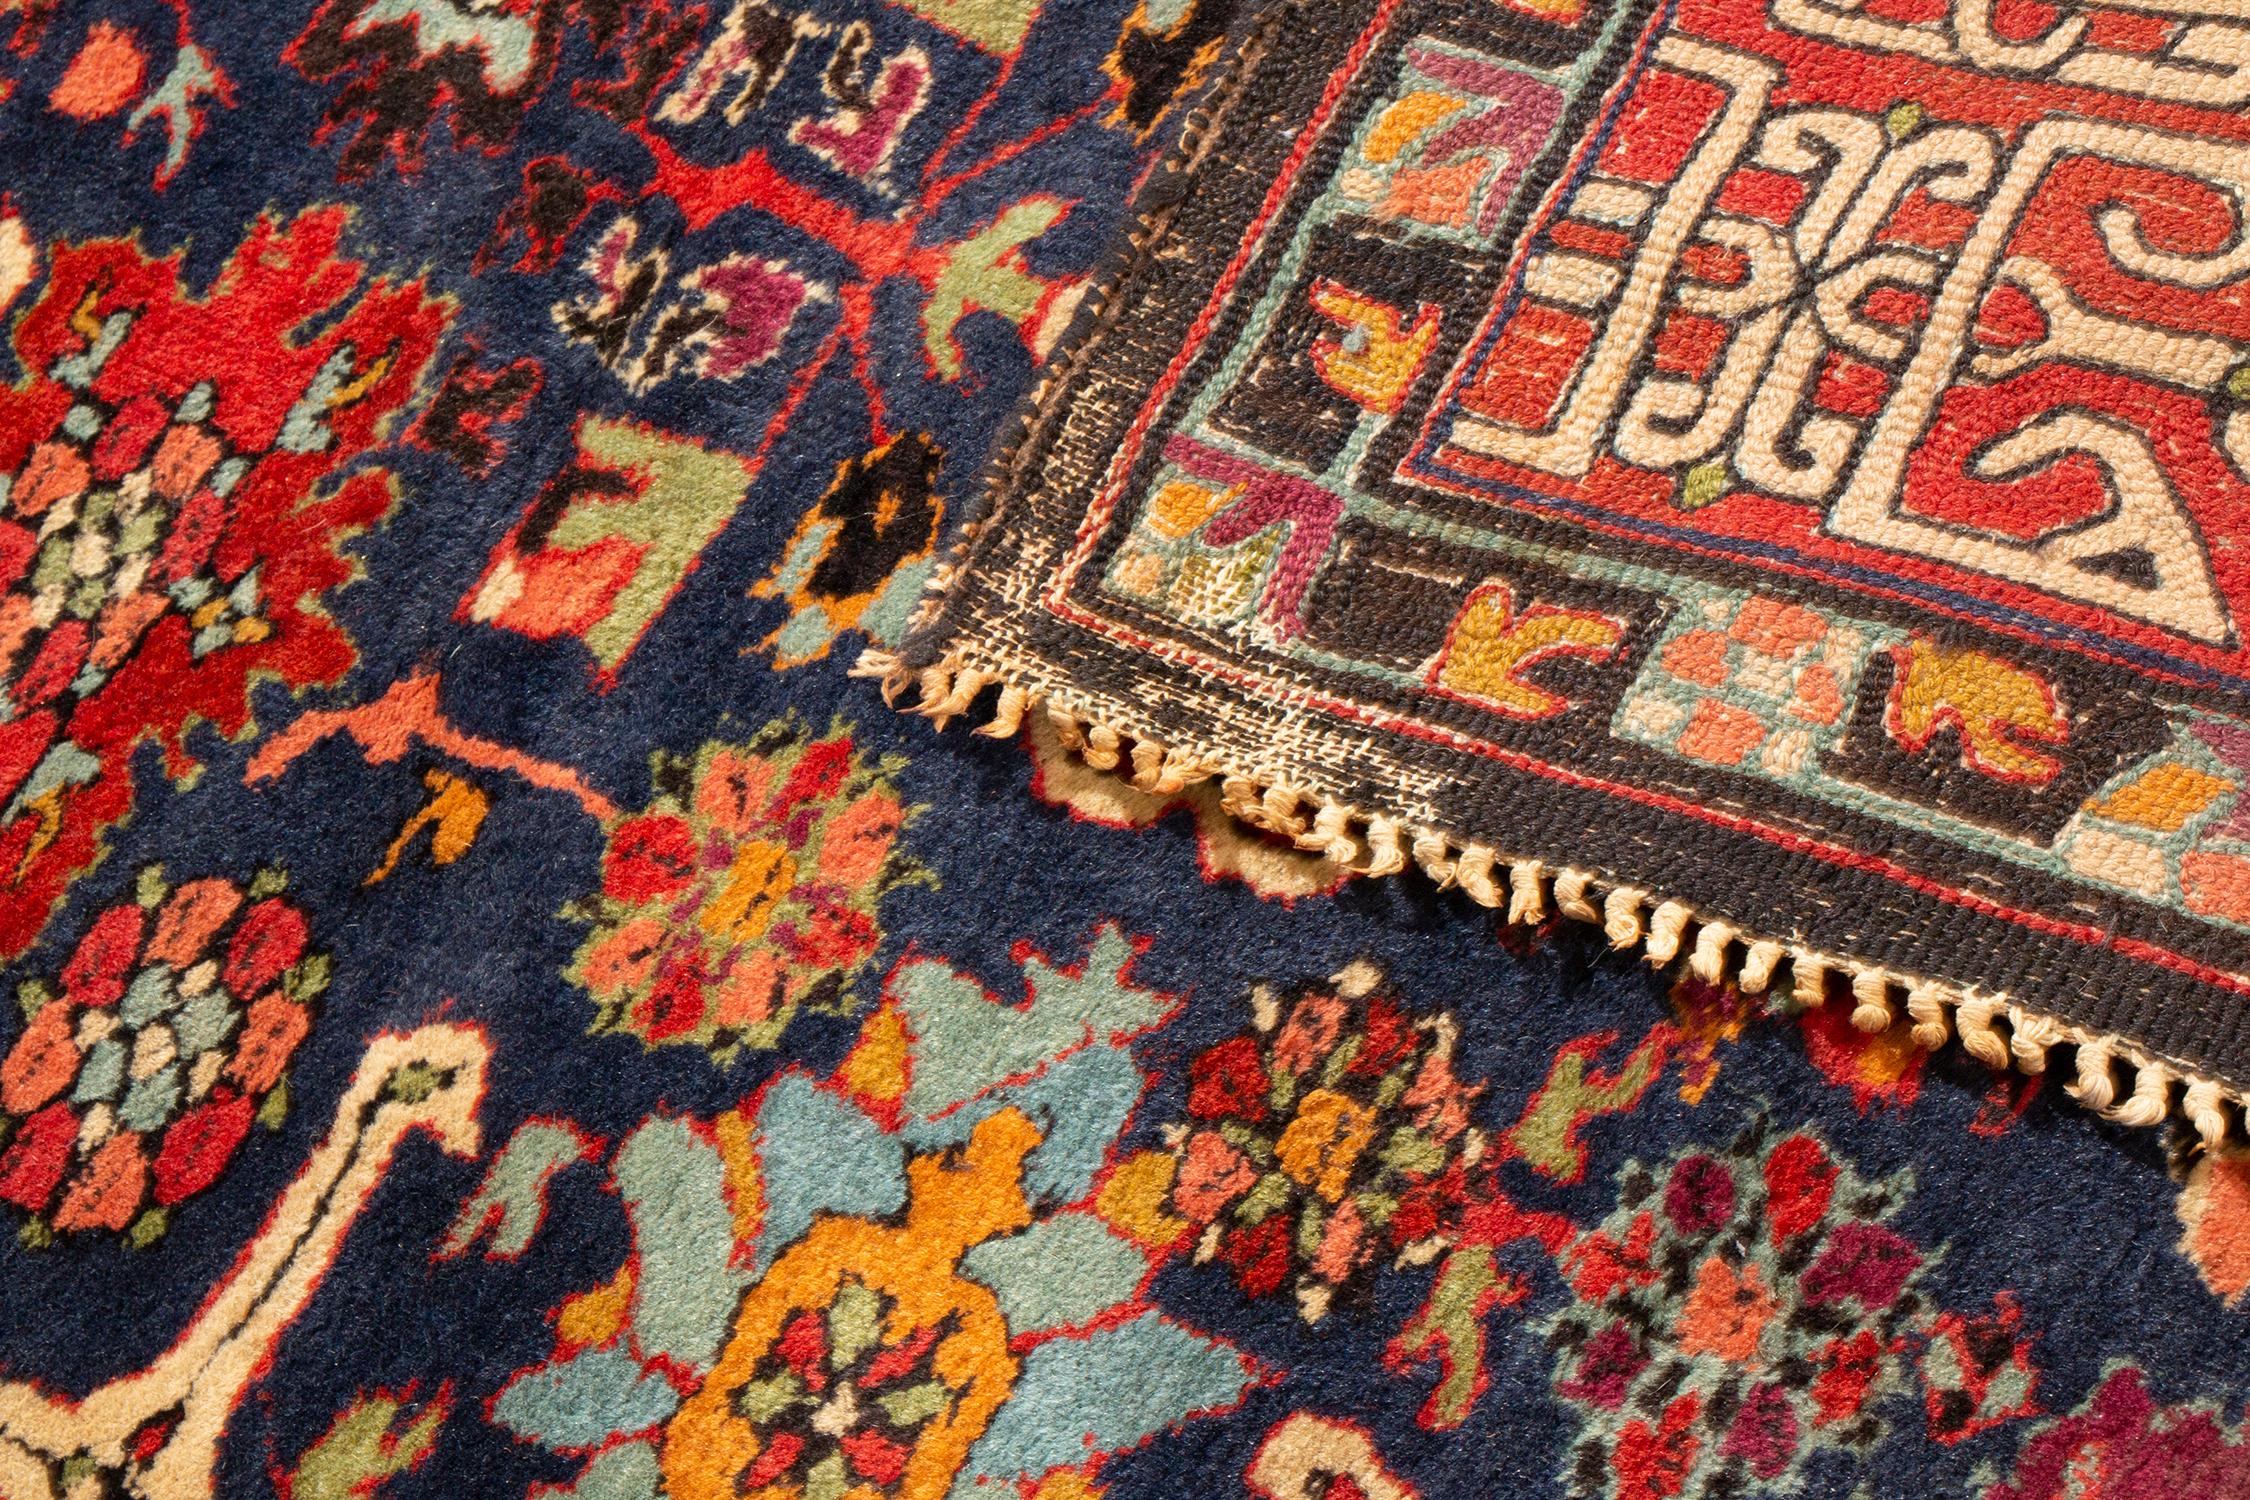 Antique German Blue and Red Rug with Floral Patterns by Rug & Kilim In Good Condition For Sale In Long Island City, NY